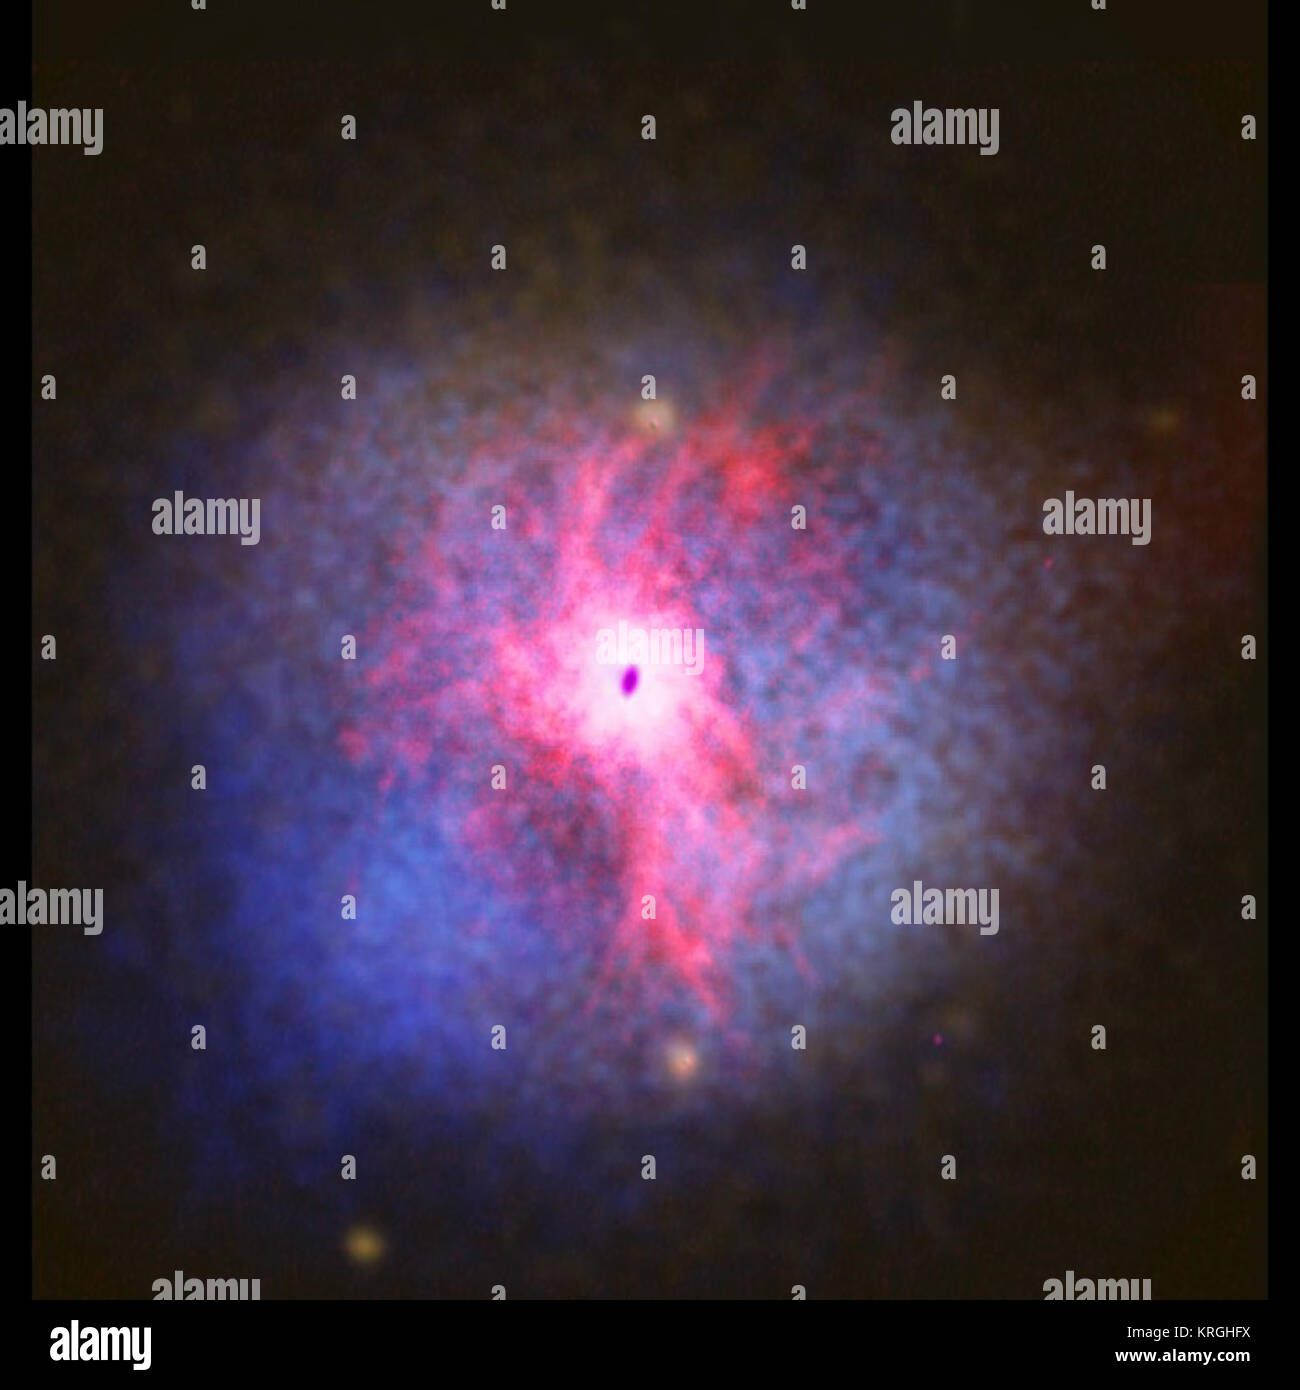 This image shows a composite view of the giant elliptical galaxy NGC 5044.  The stellar component, as observed at optical wavelengths, is shown in white at the centre of the image. The other stars scattered around the image are foreground stars from our own Galaxy.  The galaxy is embedded in a hot atmosphere of ionised hydrogen gas, which is shown in blue. With temperatures up to tens of millions of K, the hot gas shines brightly in X-rays and was observed using NASA's Chandra X-ray Observatory.  Observations show that some of the hot gas cools down and flows towards the centre of the galaxy.  Stock Photo